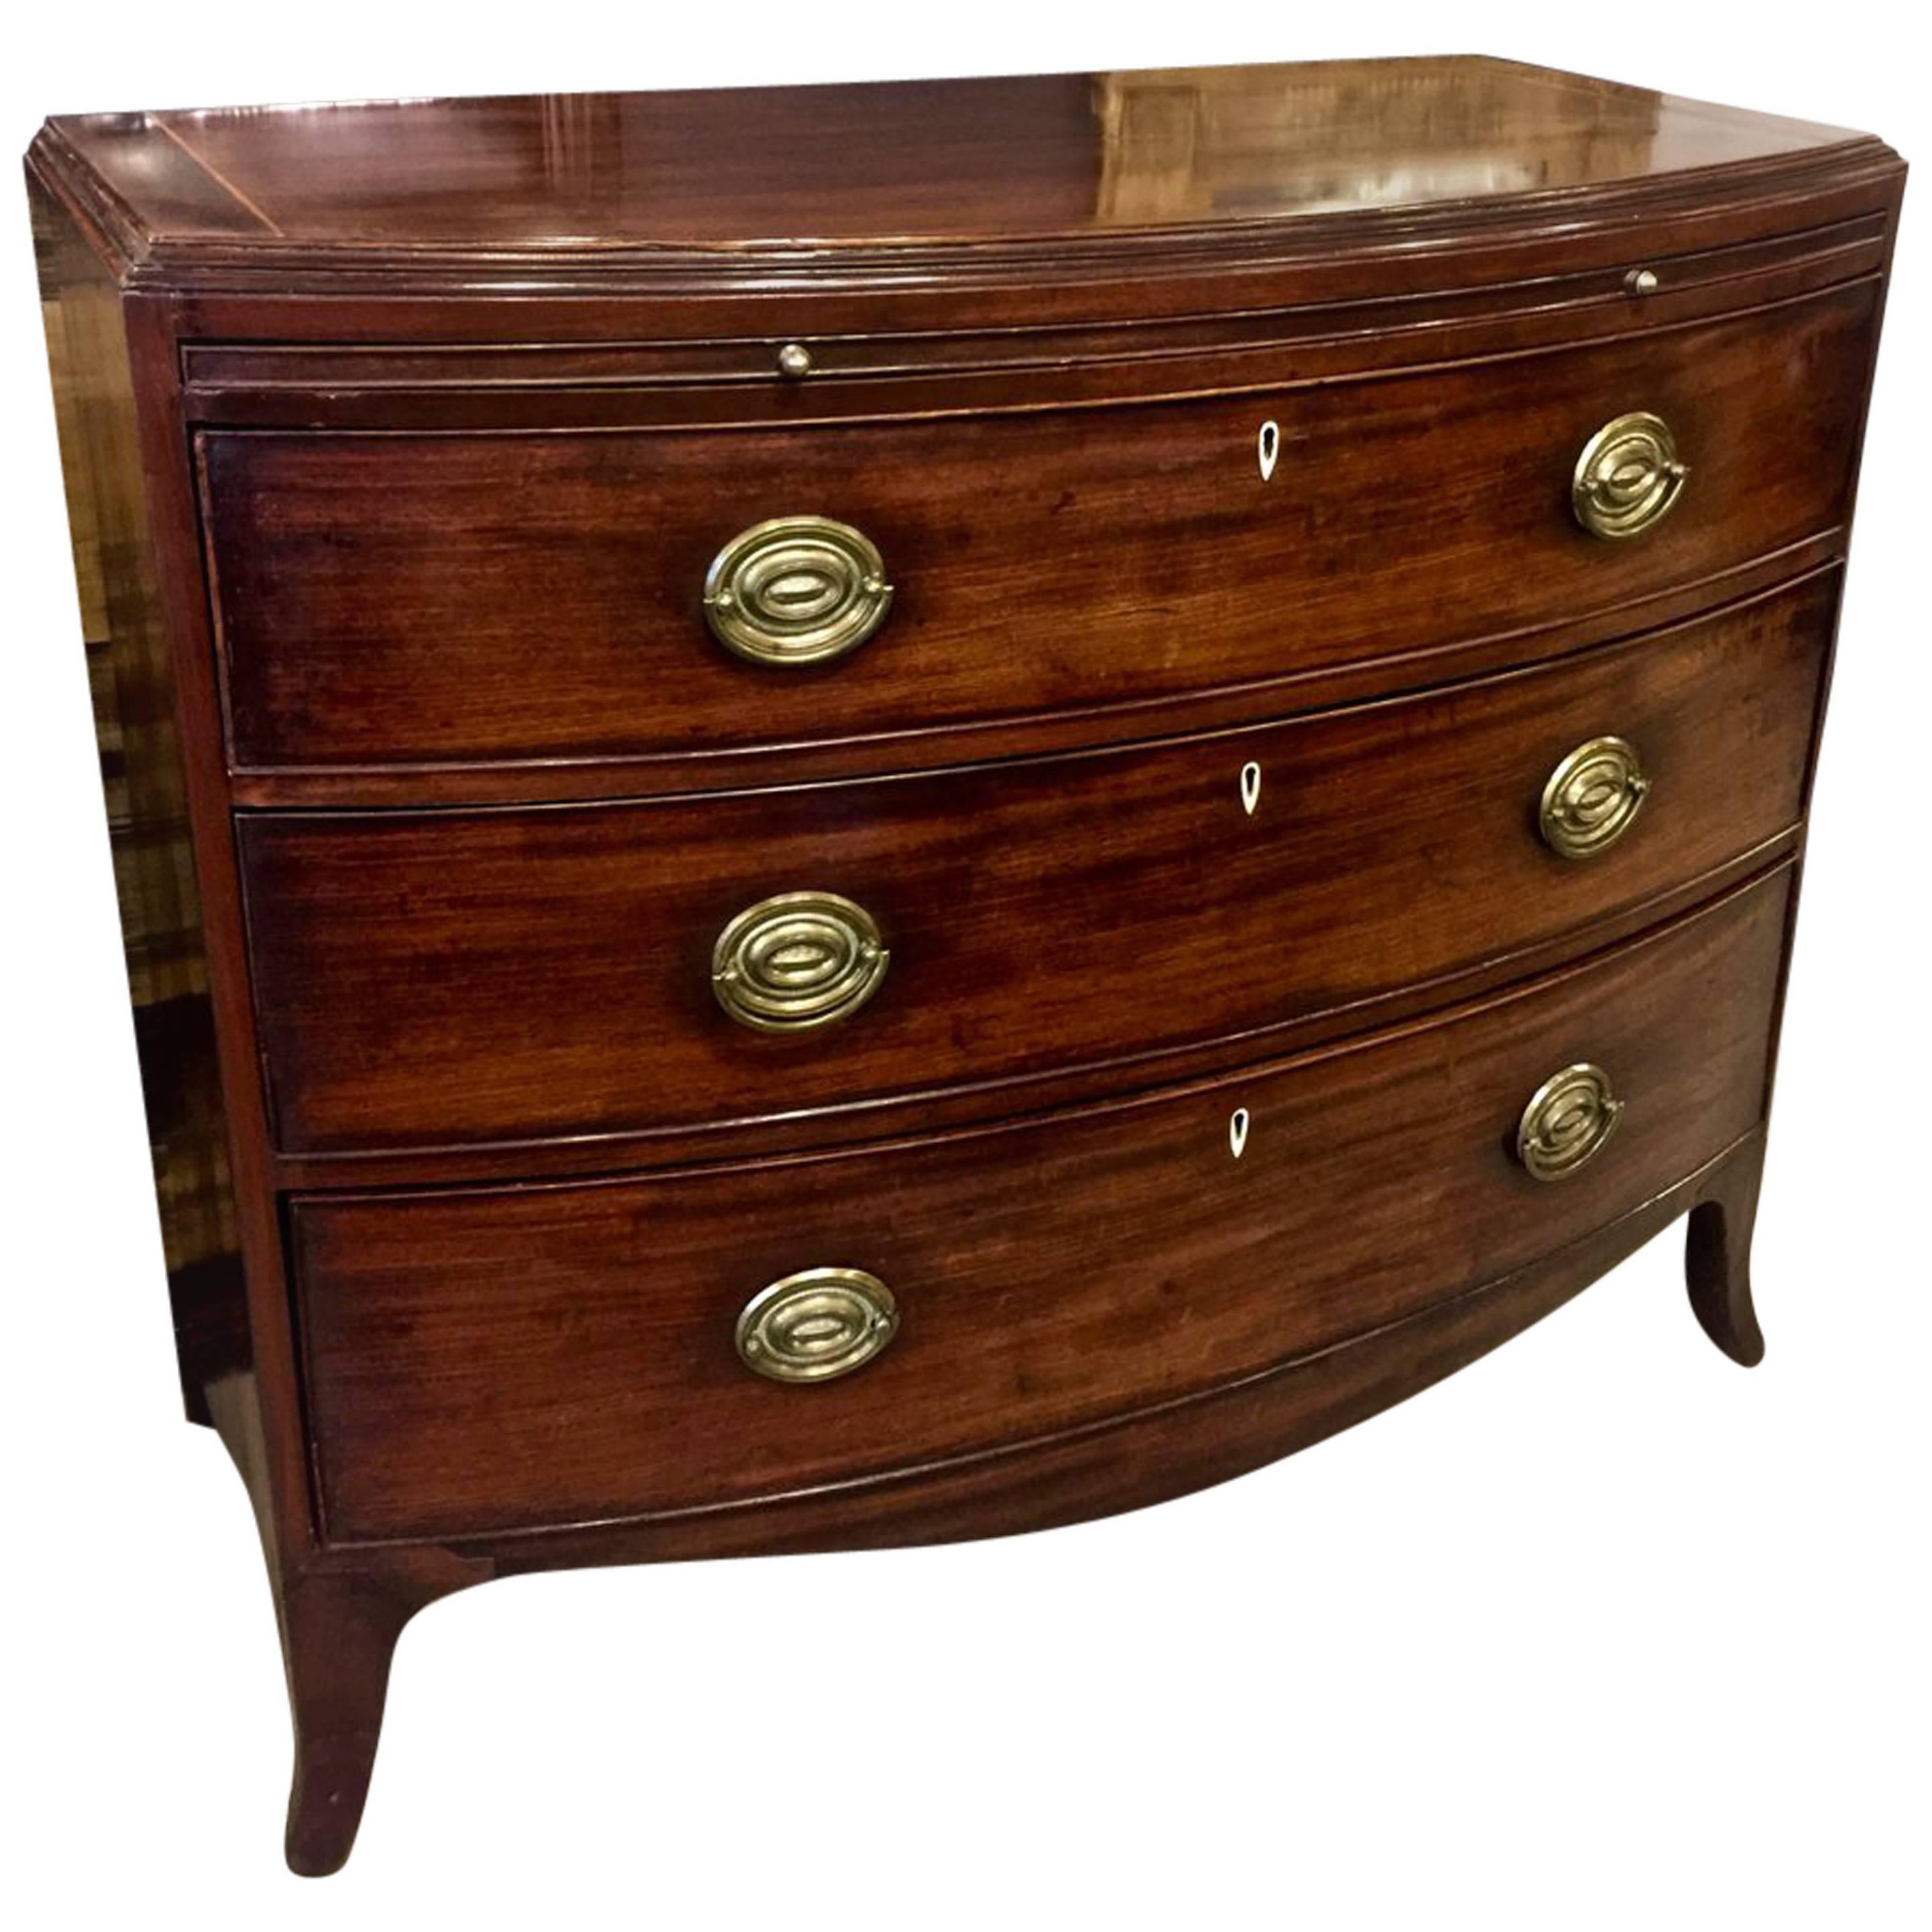 George III Bow Front Chest of Drawers, c. 1780-90